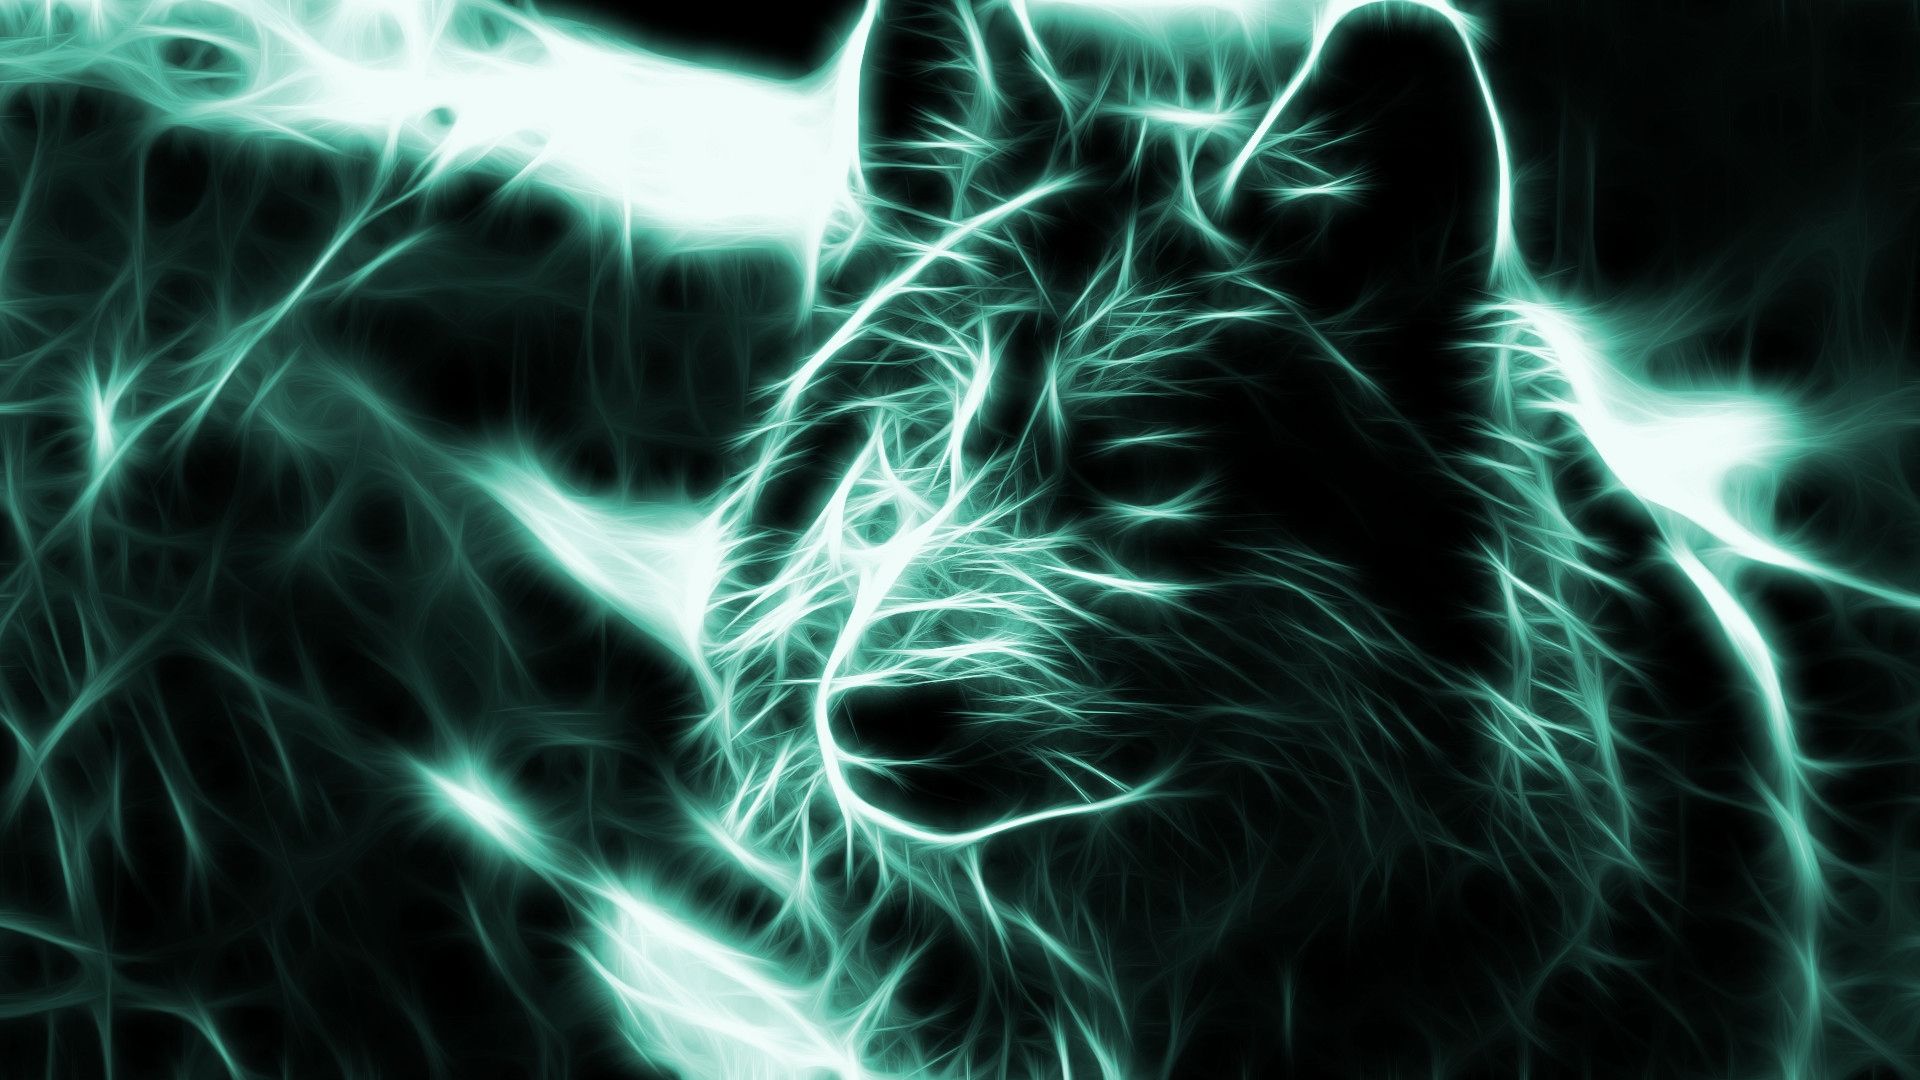 Neon Wolf Wallpaper New Neon Wolf Wallpaper 54 Image Of the Day